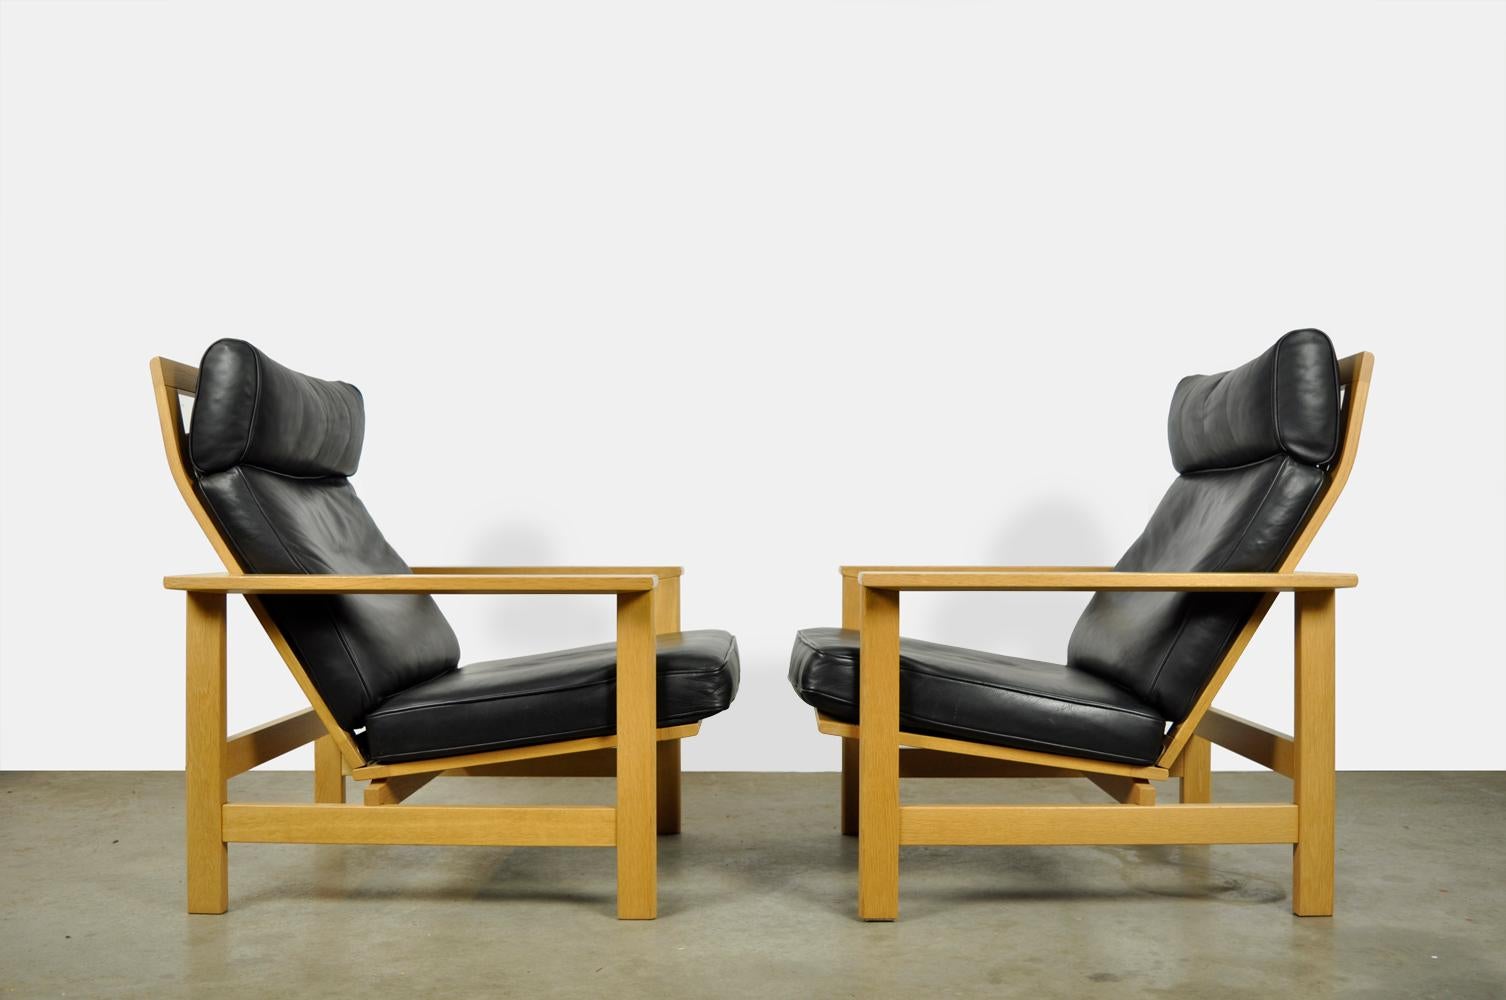 Scandinavian lounge armchairs, model 2461, designed by Soren Holst and produced by Frederica, 1970s Denmark. The lounge armchairs have a light oak frame with a backrest that can be adjusted in two positions. There are black leather cushions in the